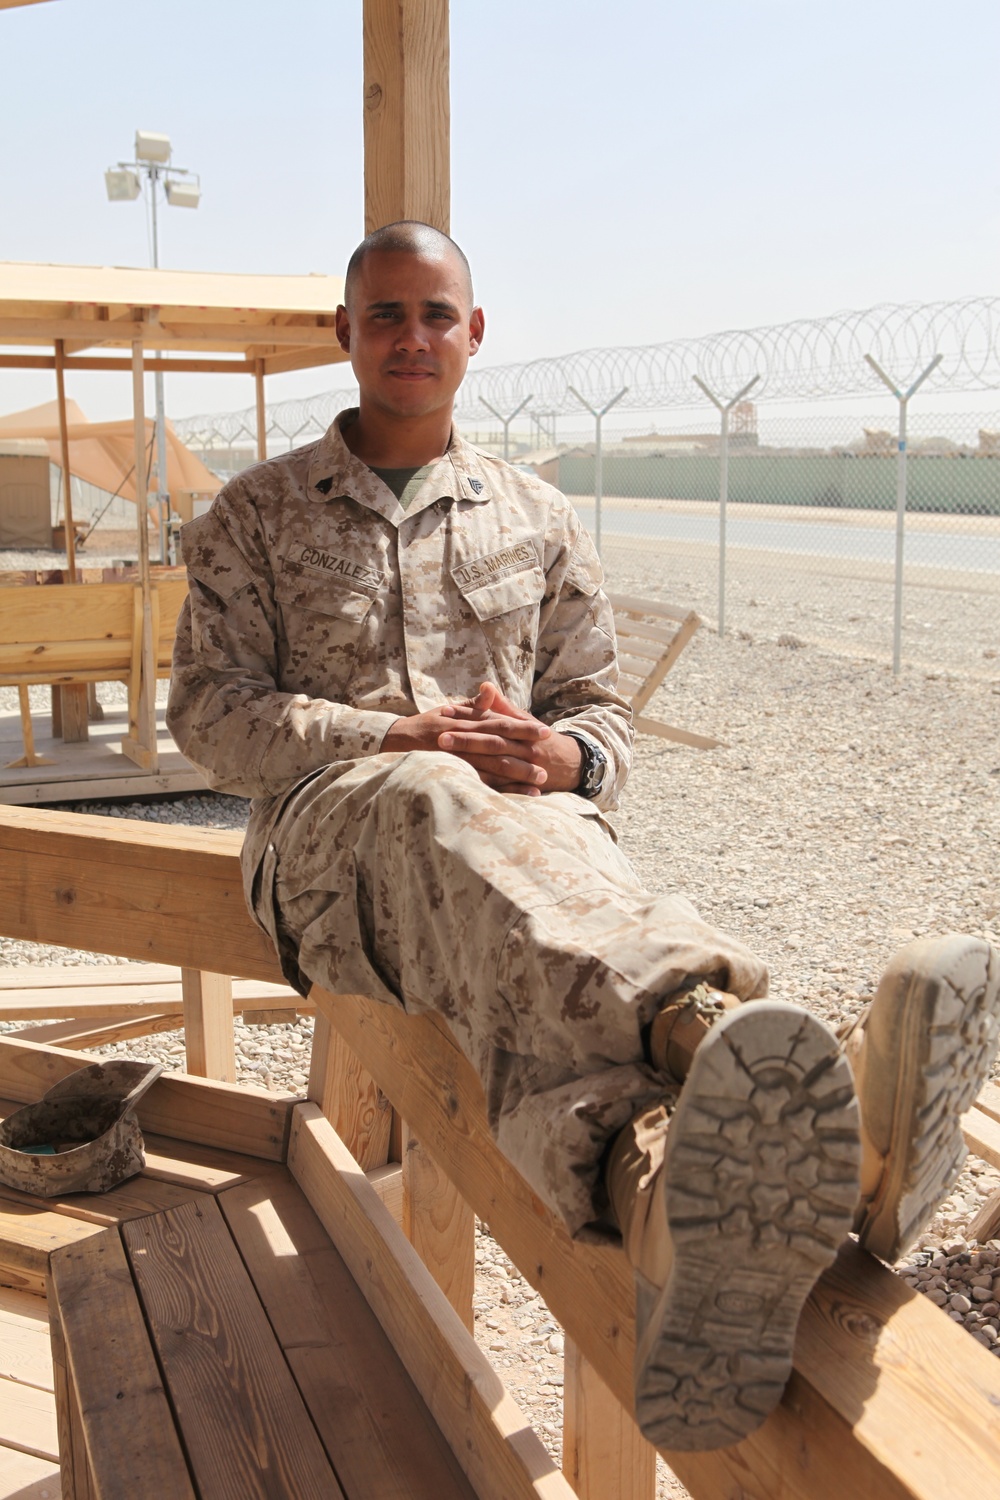 From streets of Harlem to sands of Afghanistan, Marine maintains accountability with high motivation